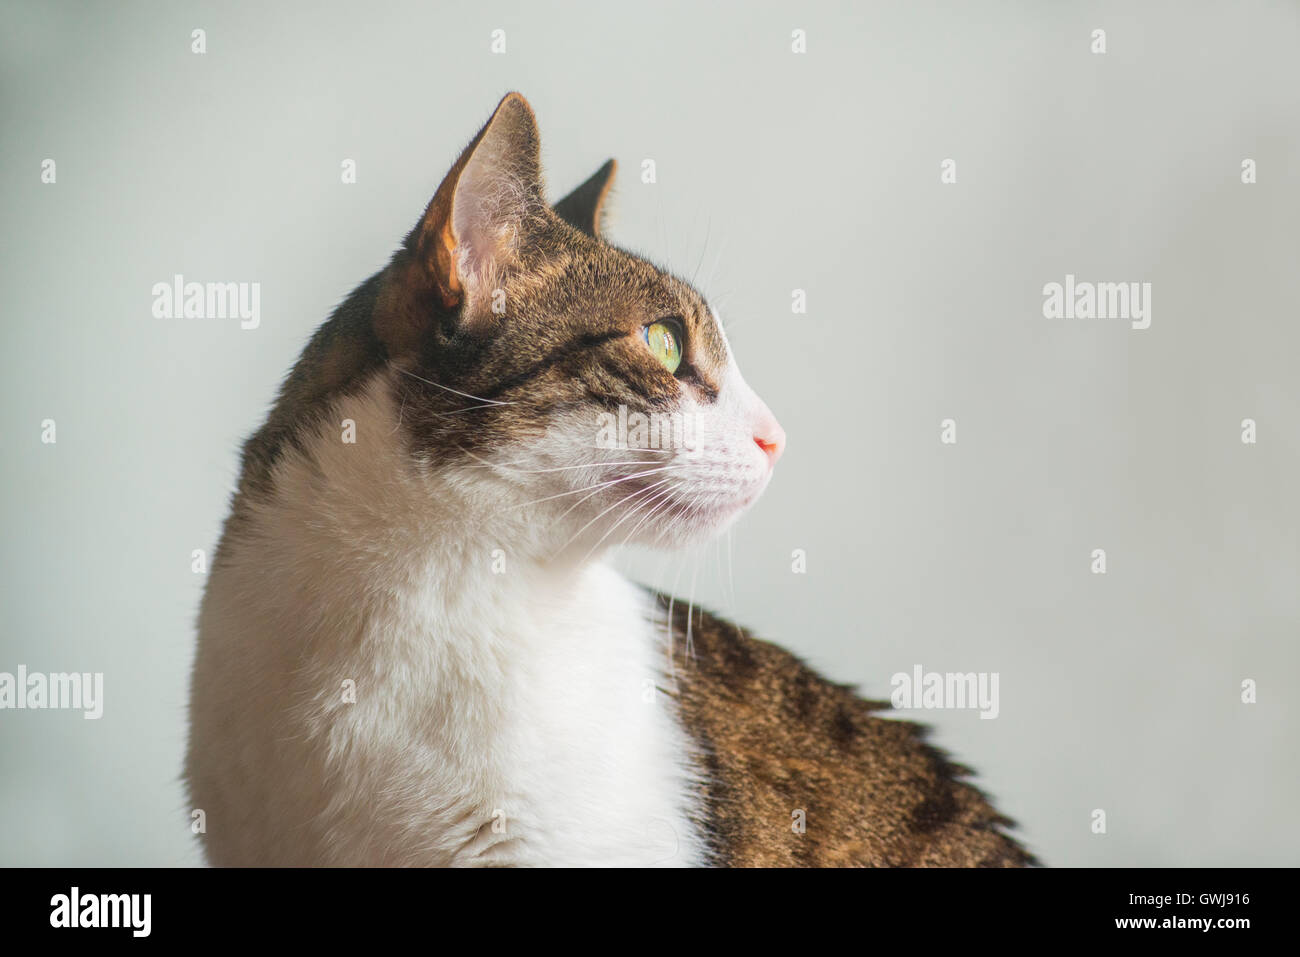 Profile portrait of tabby and white cat. Stock Photo